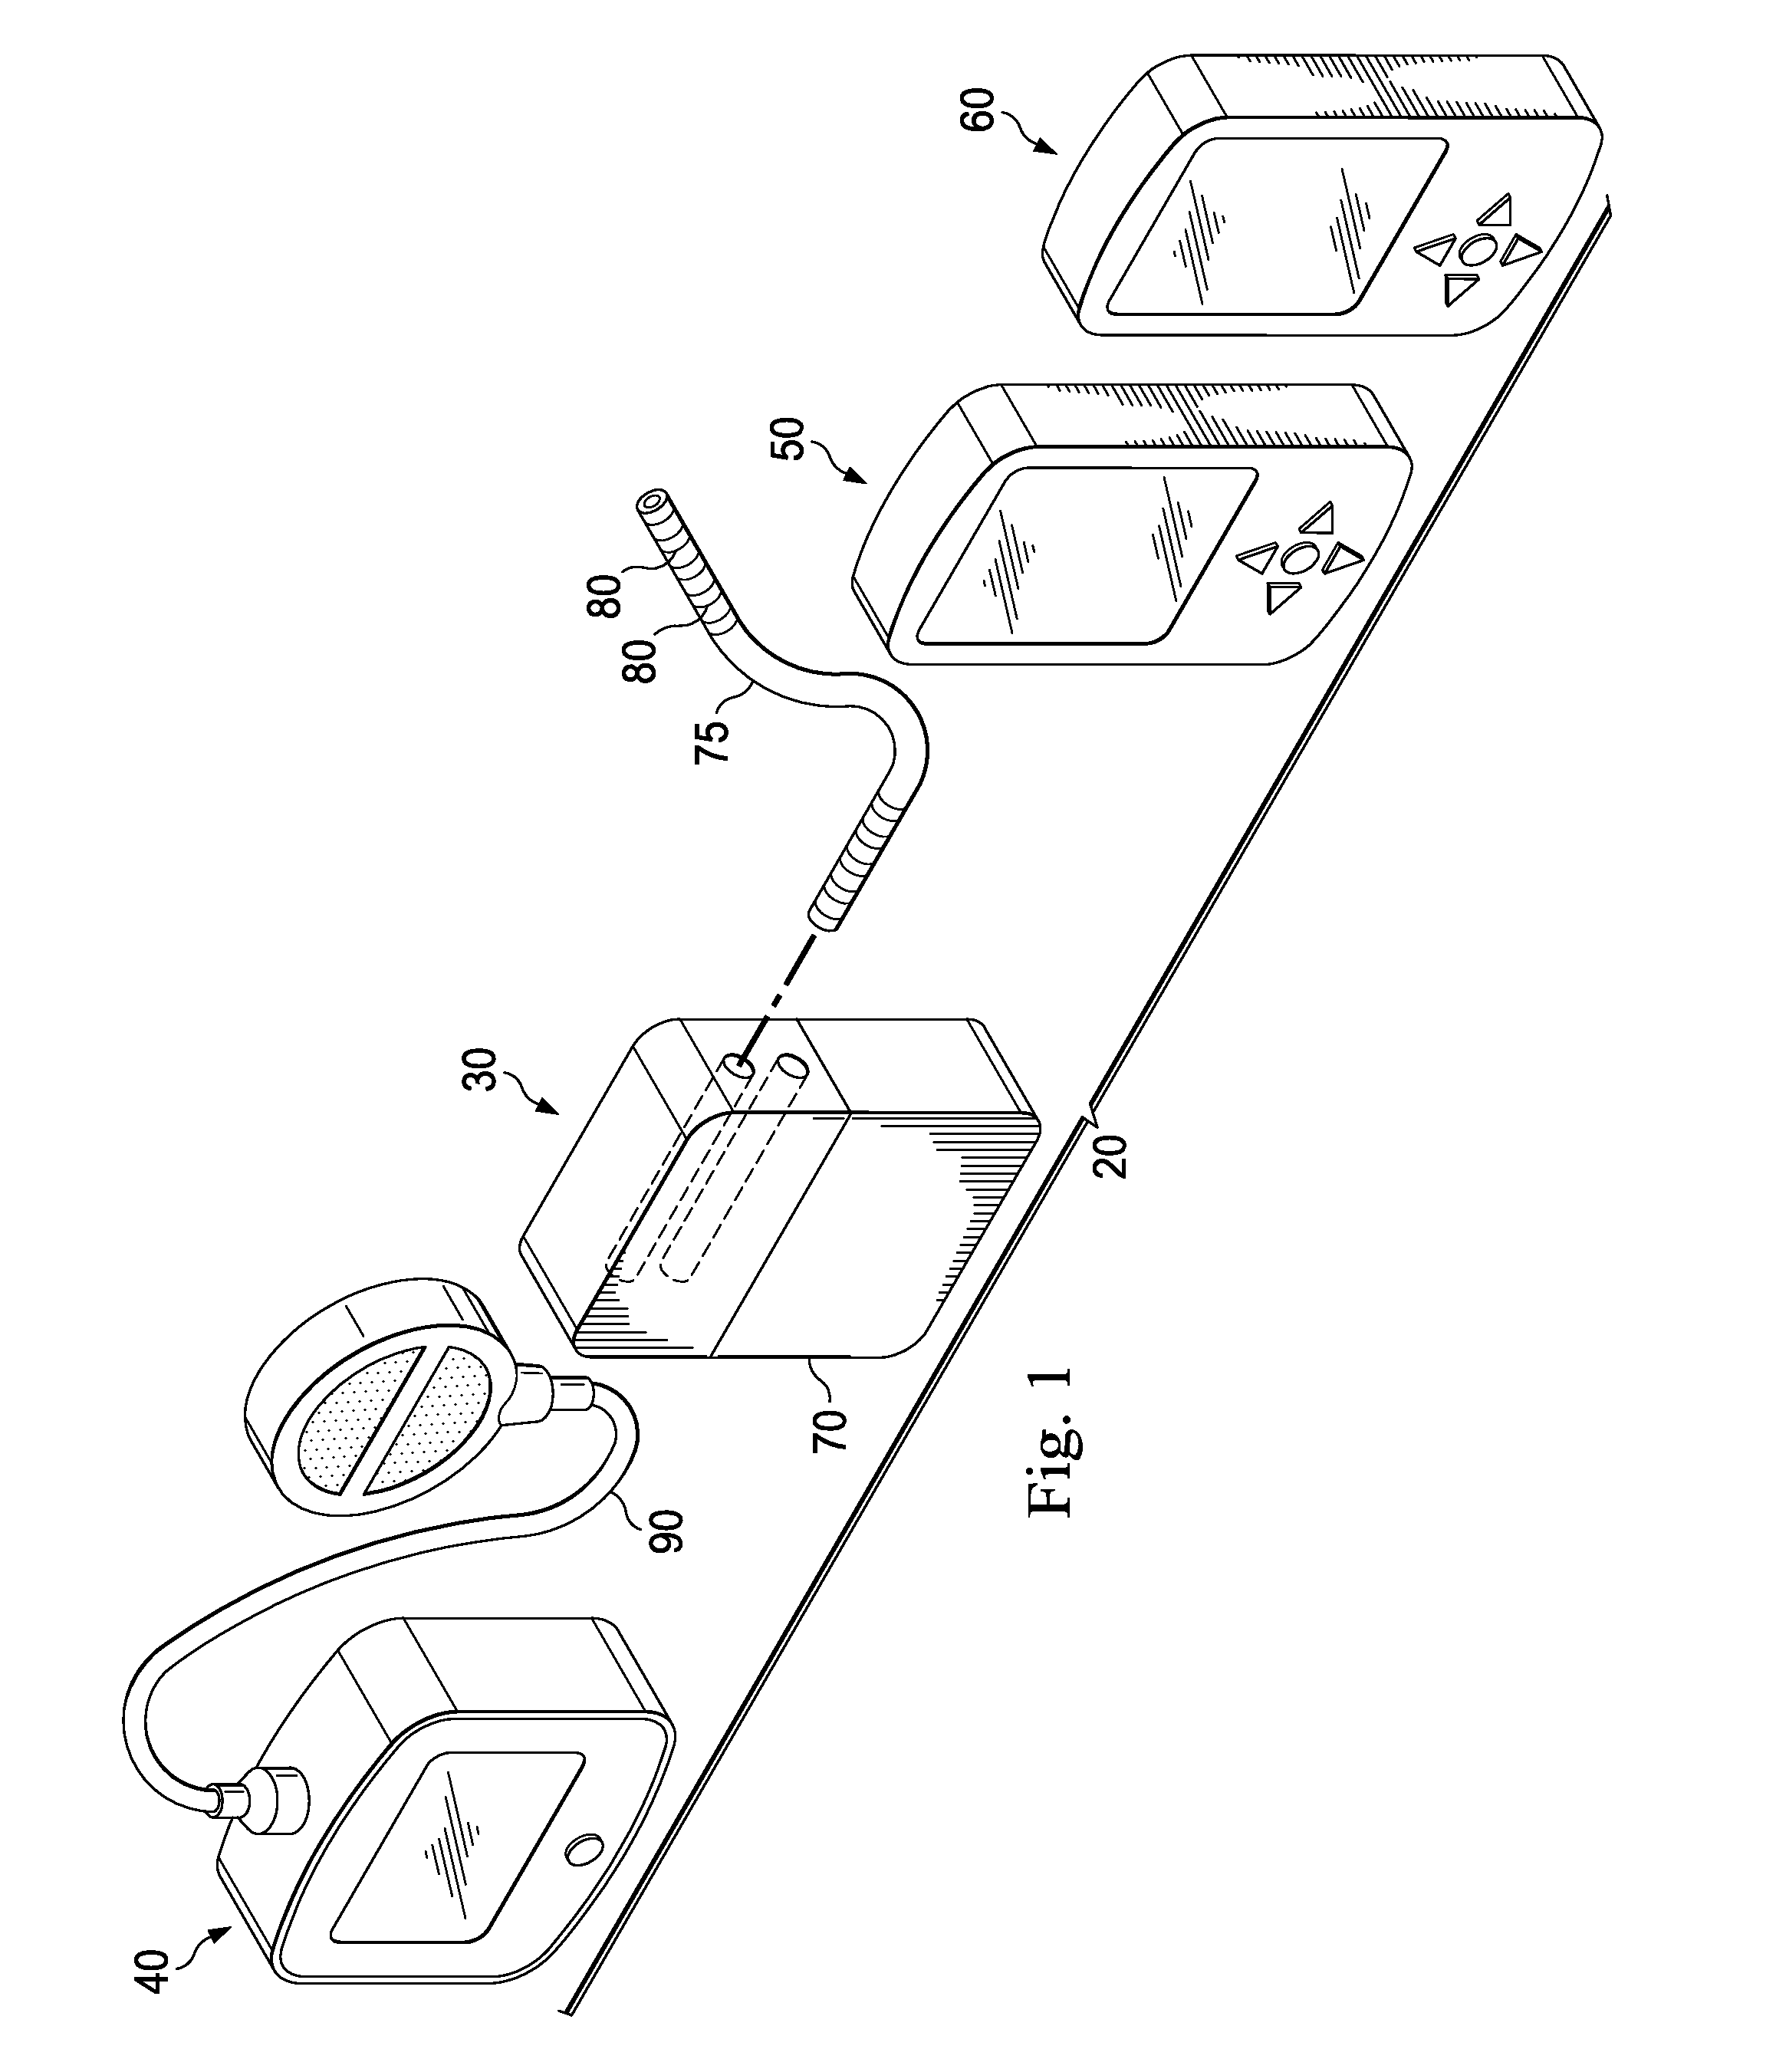 Method and System of Bracketing Stimulation Parameters on Clinician Programmers